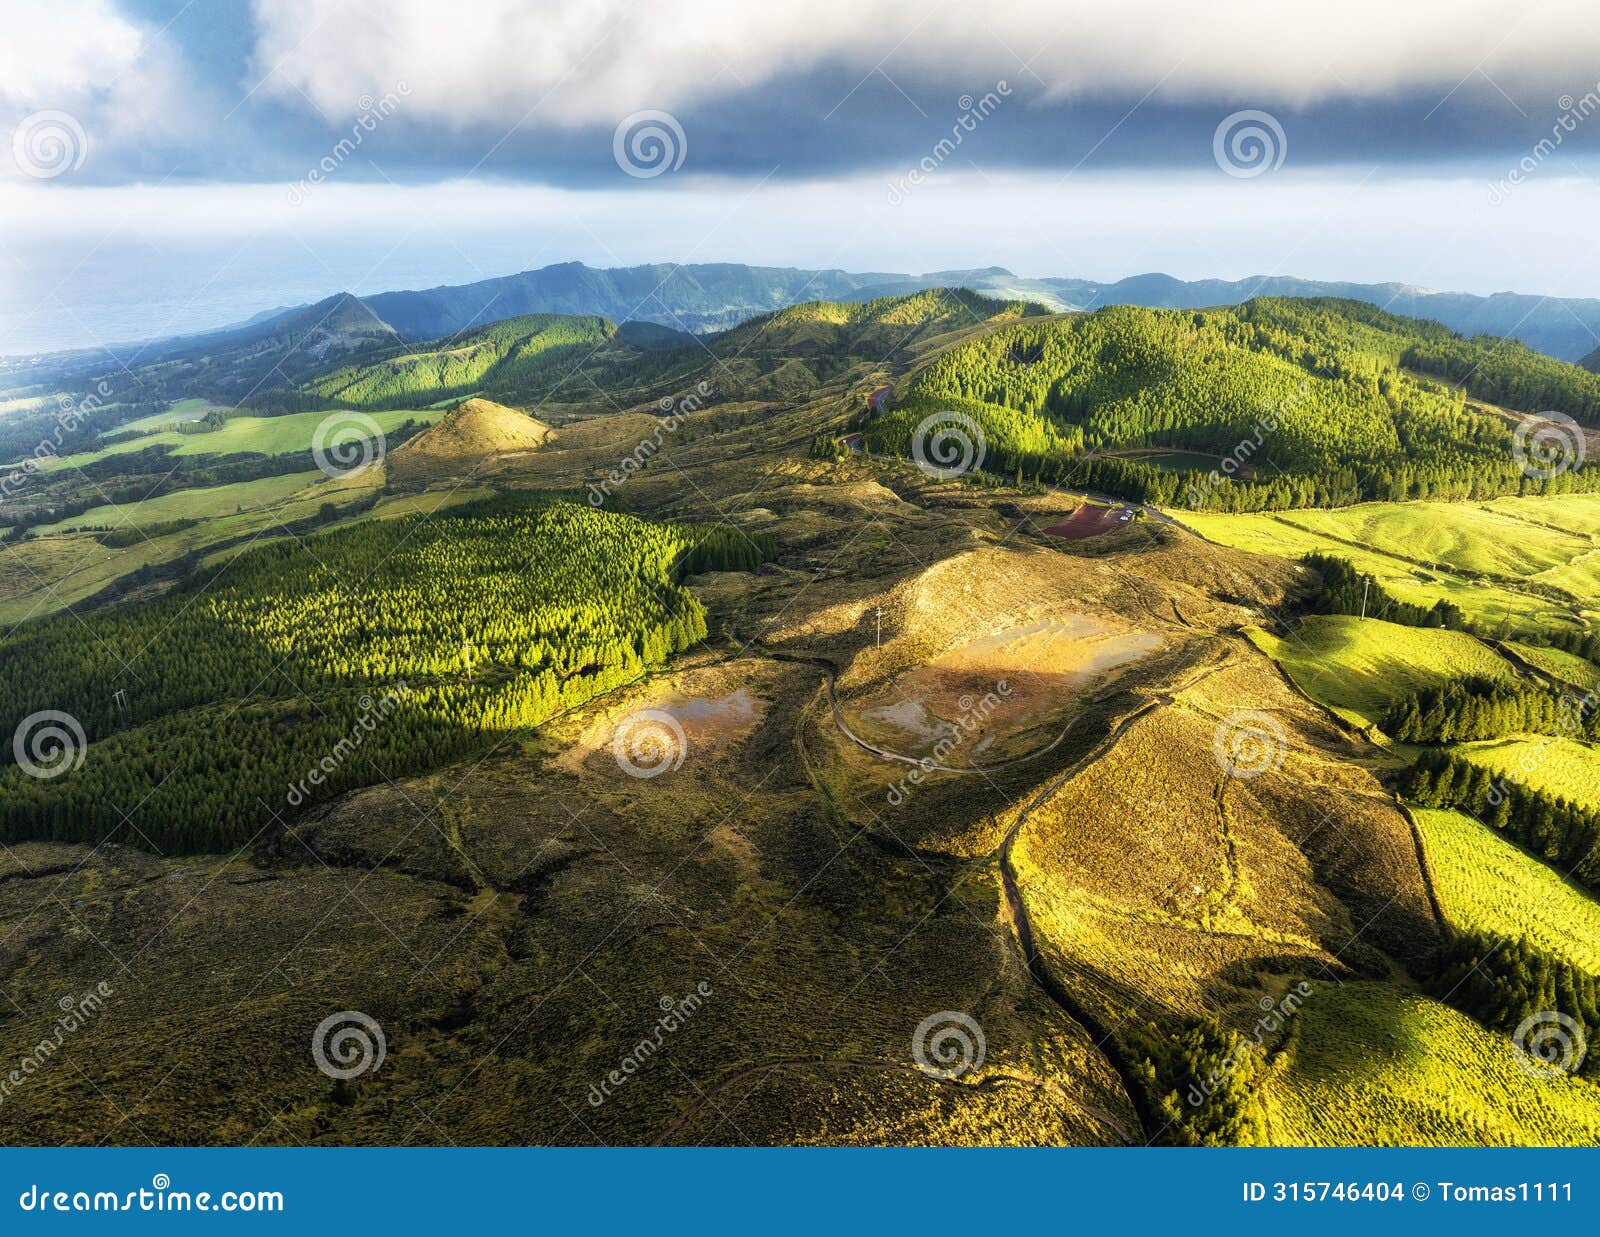 sunrise from drone viewpoint boca do inferno, hiking panorama, vulcanic lake in the background, sao miguel island, azores,